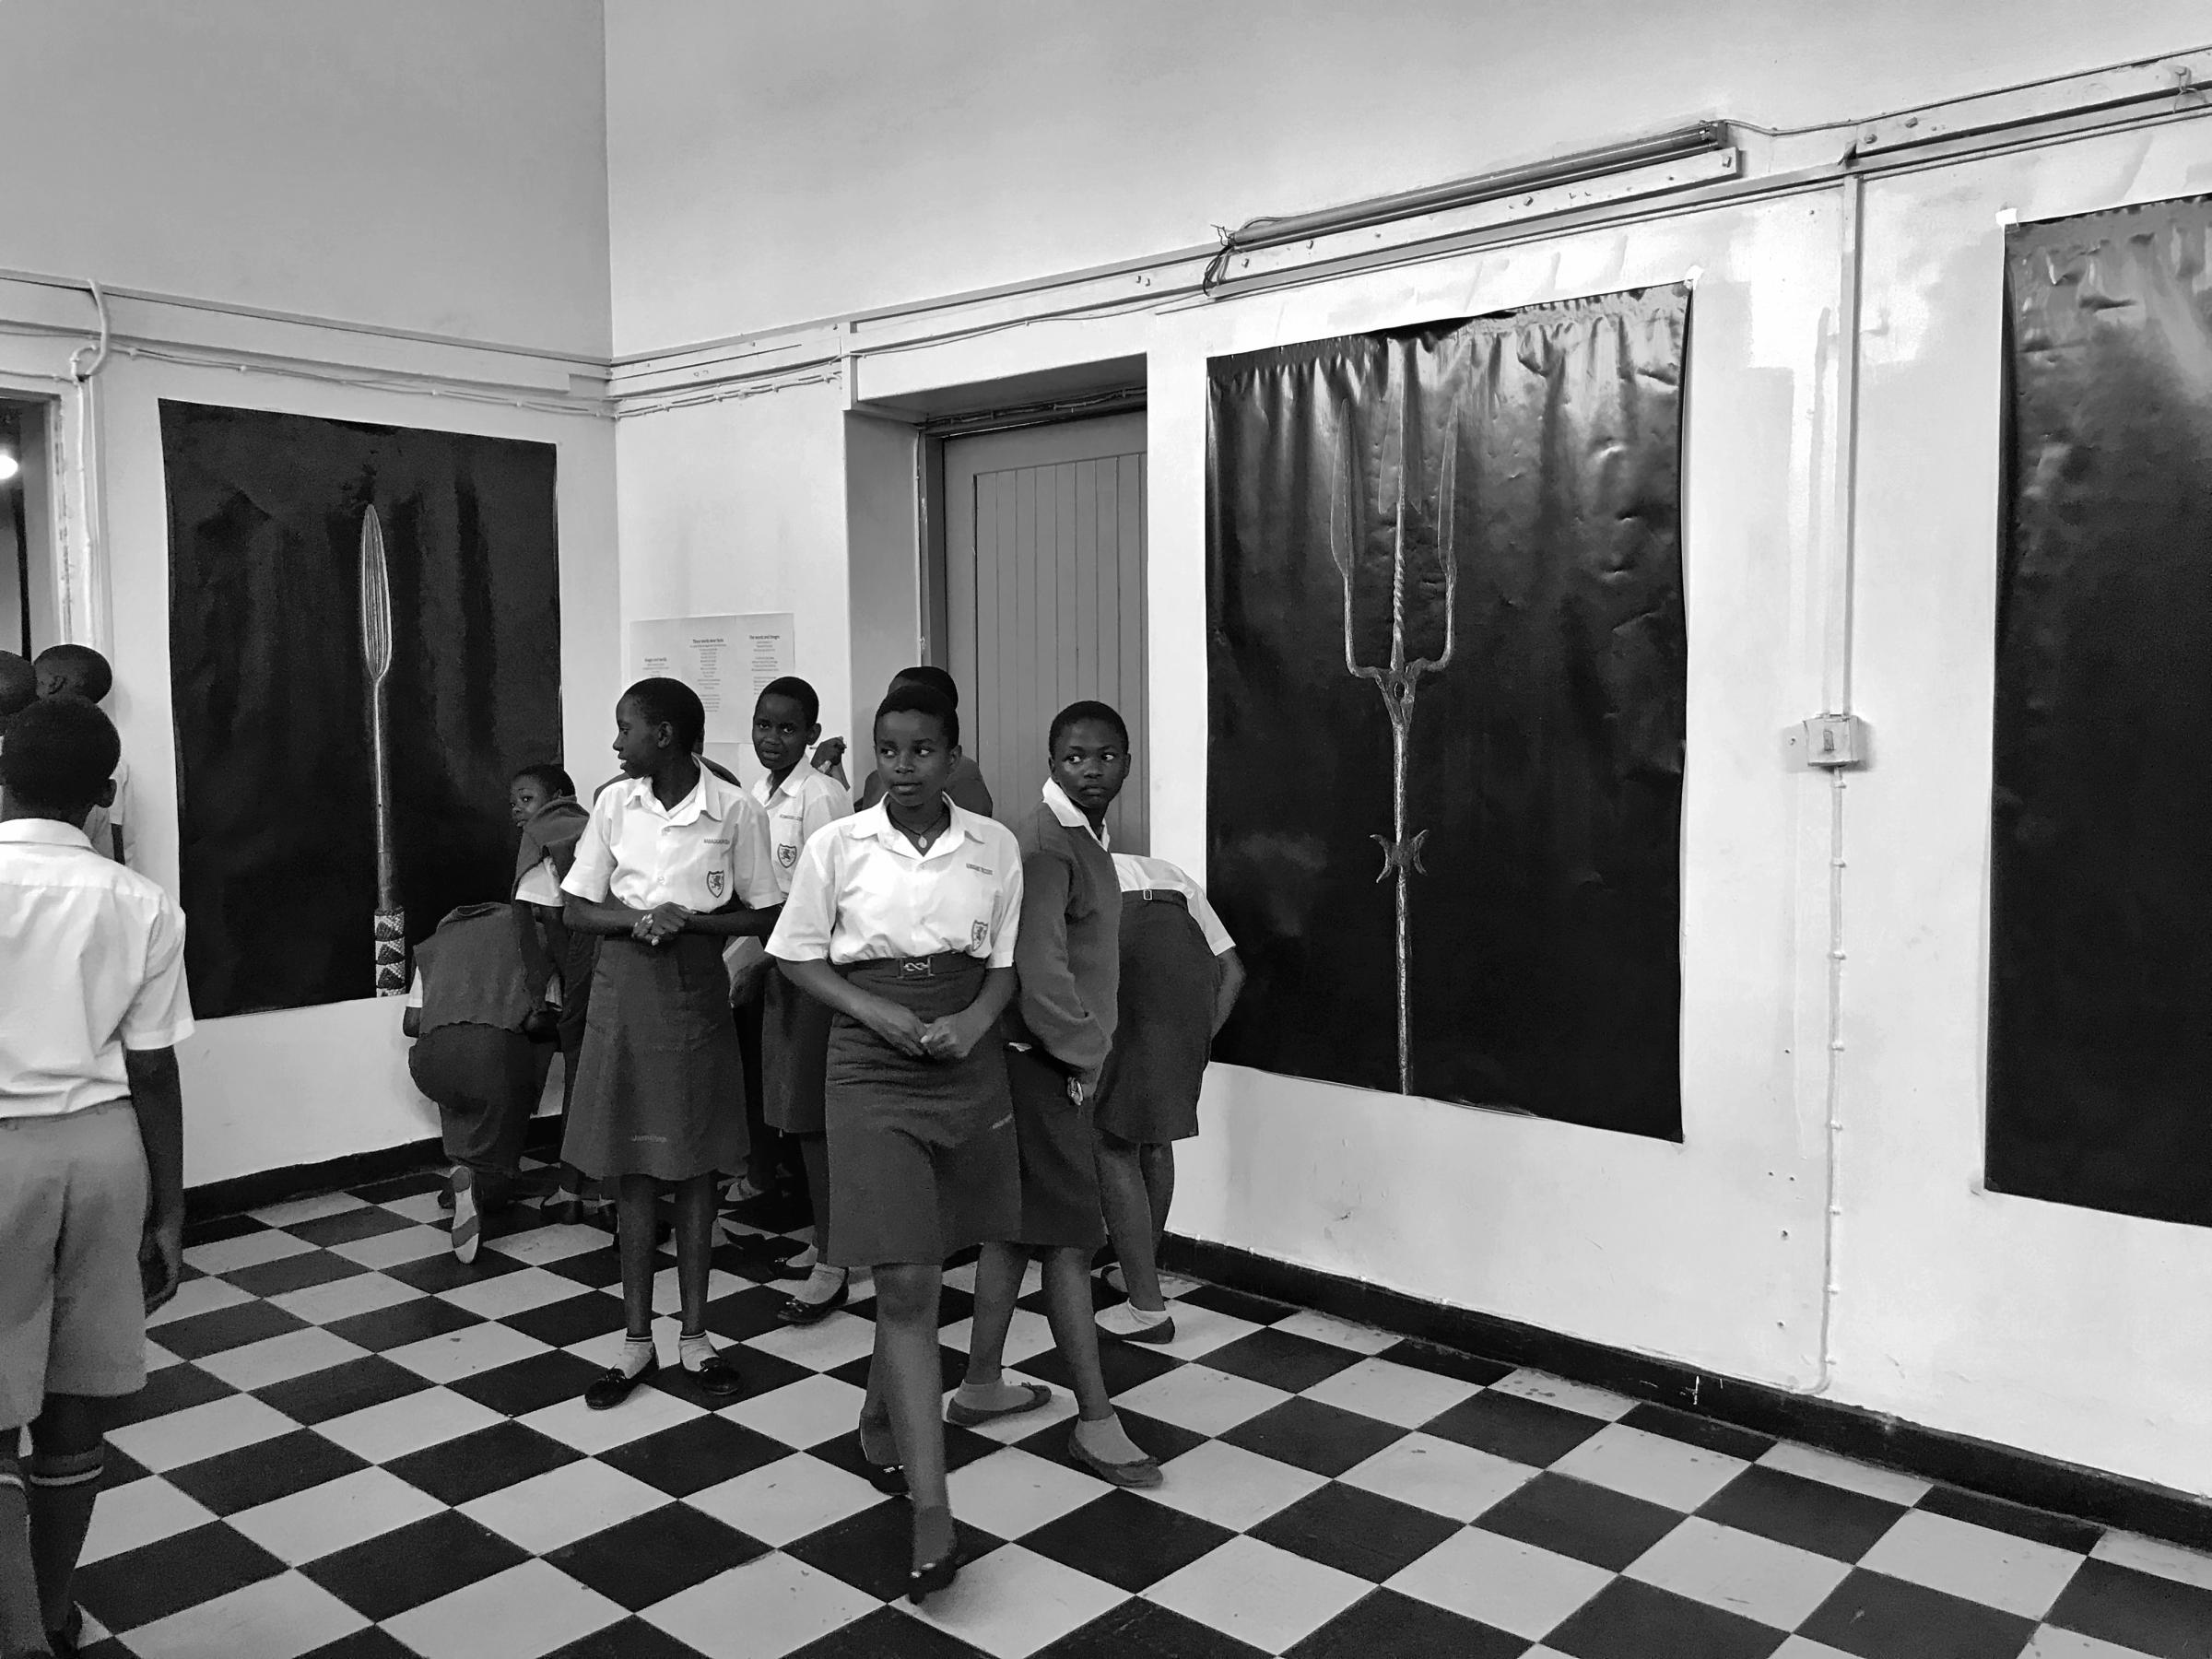 Spears a portrait of our culture, March 2020. - Students viewing portraits of Spears at the exhibition hall, Uganda museum.